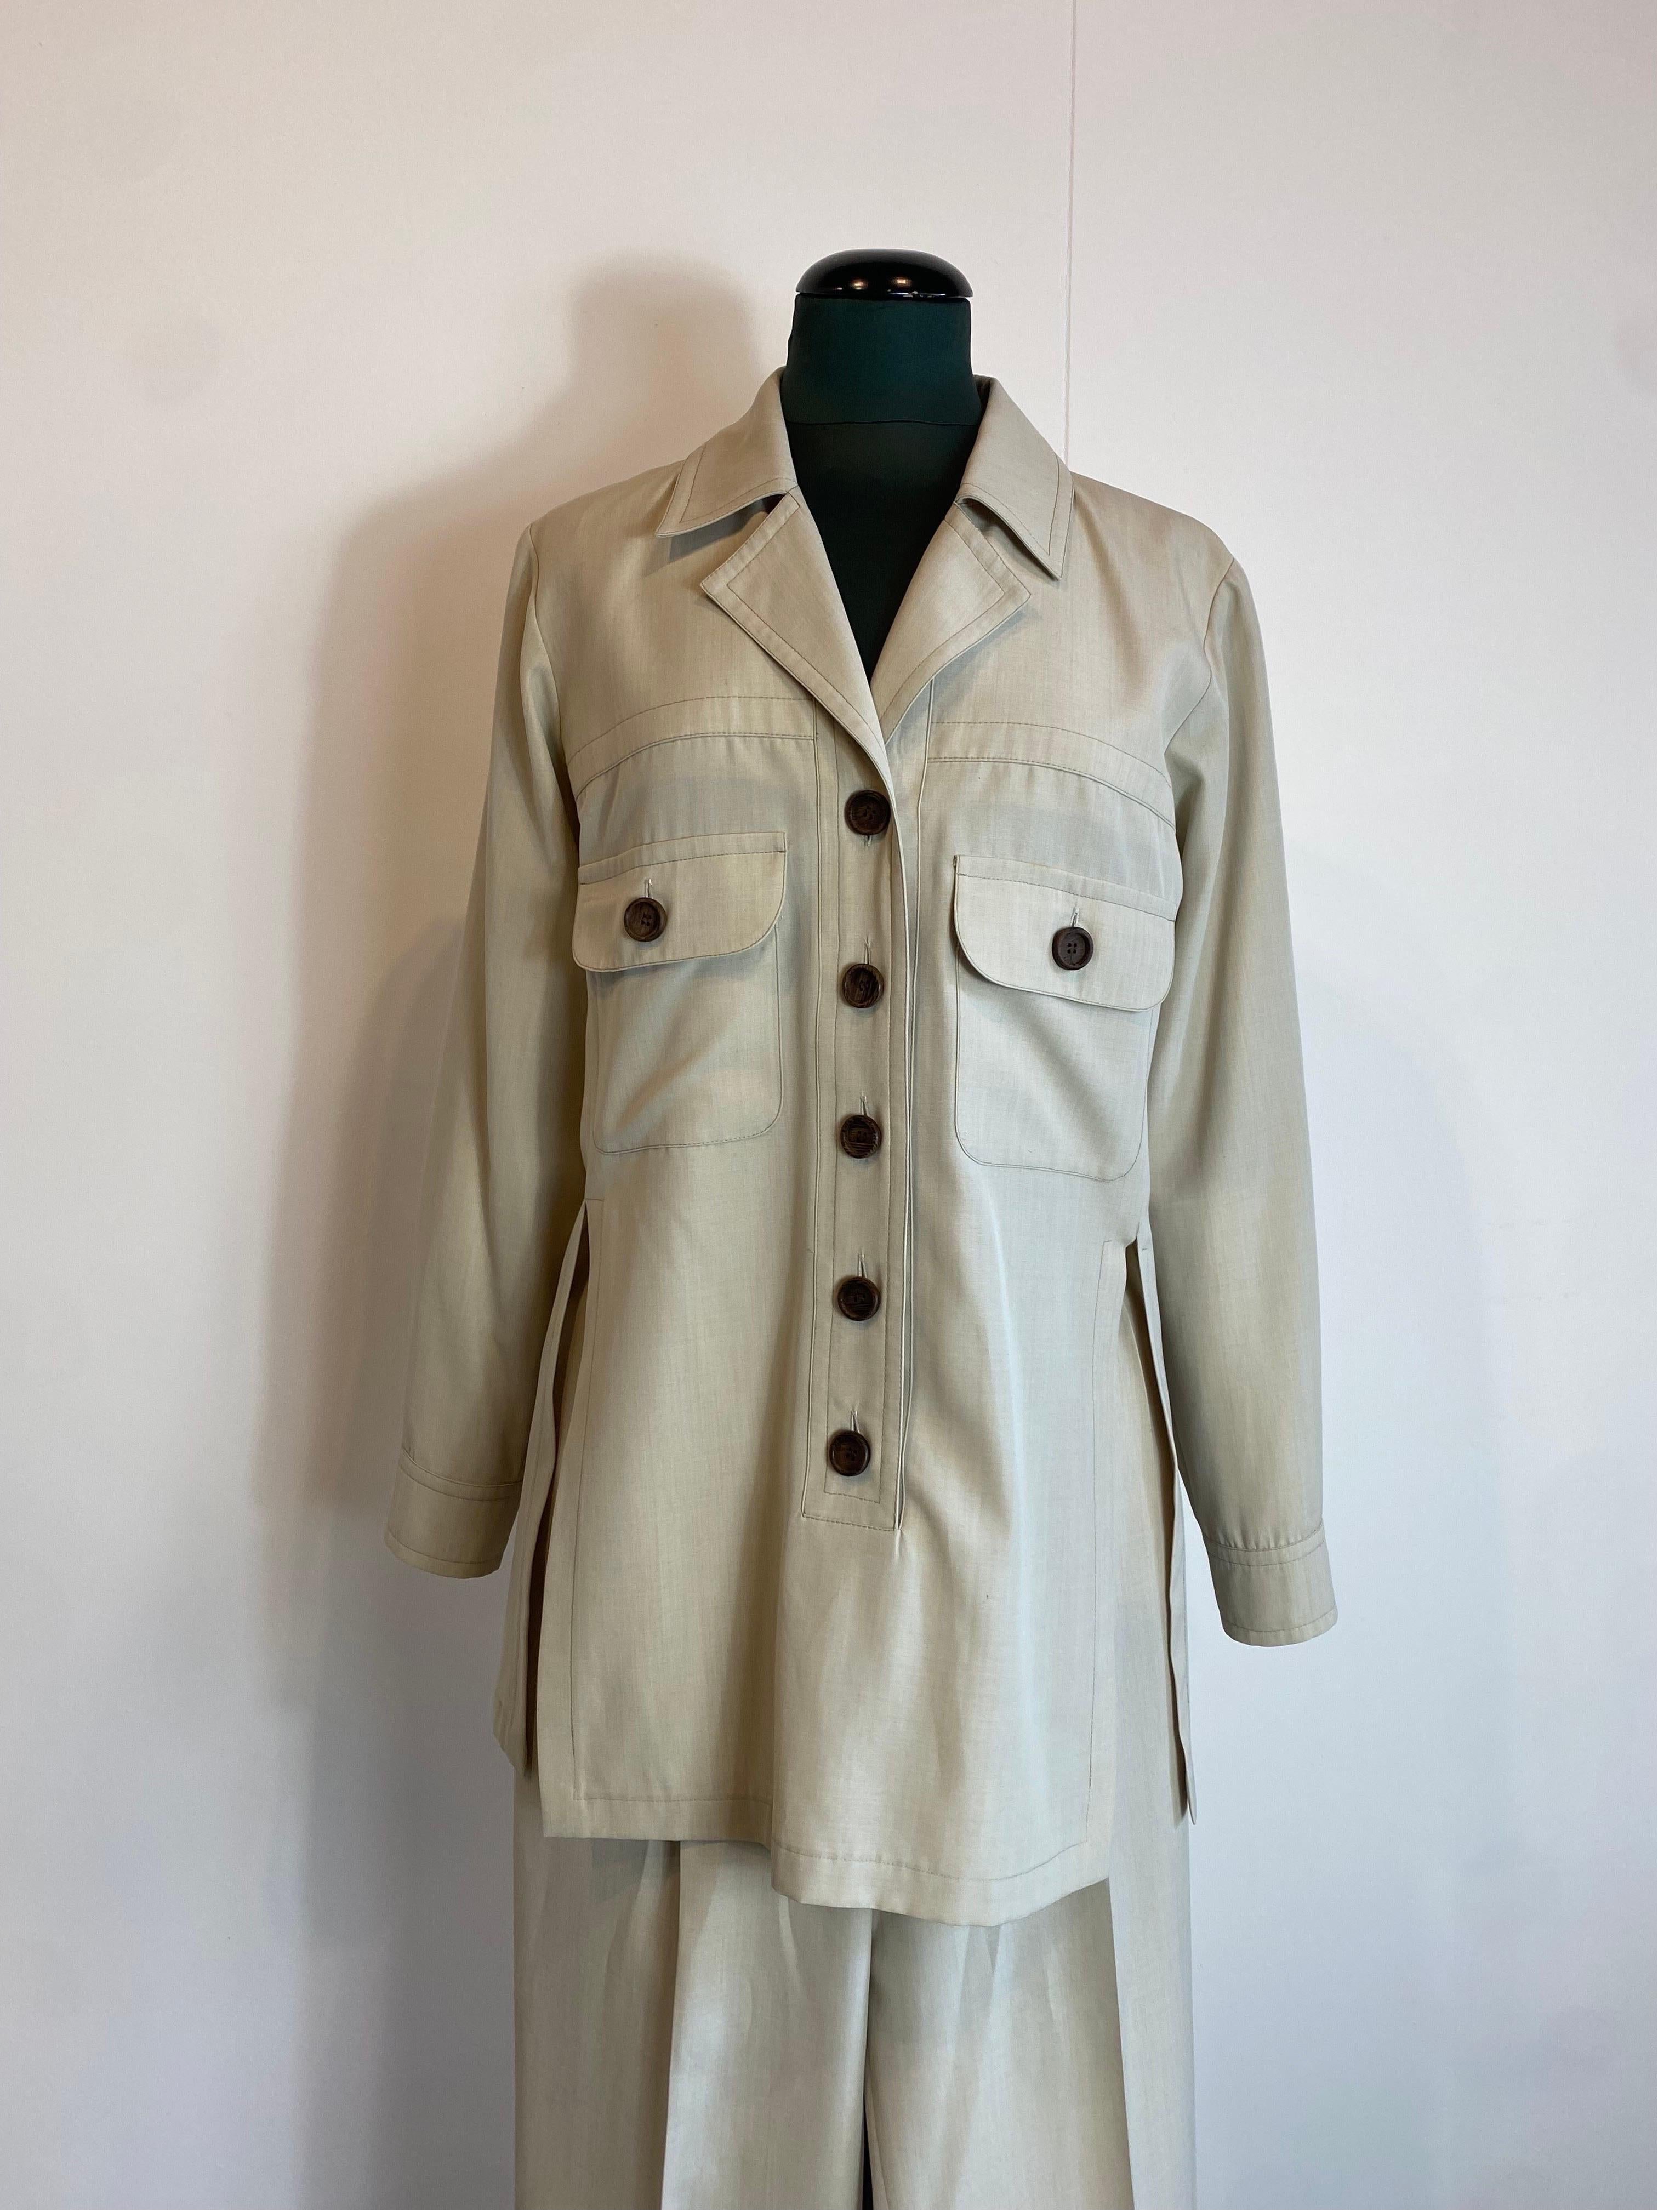 Yves Saint Laurent Variation iconic Sahariana Blouse and Pants Suit In Excellent Condition For Sale In Carnate, IT